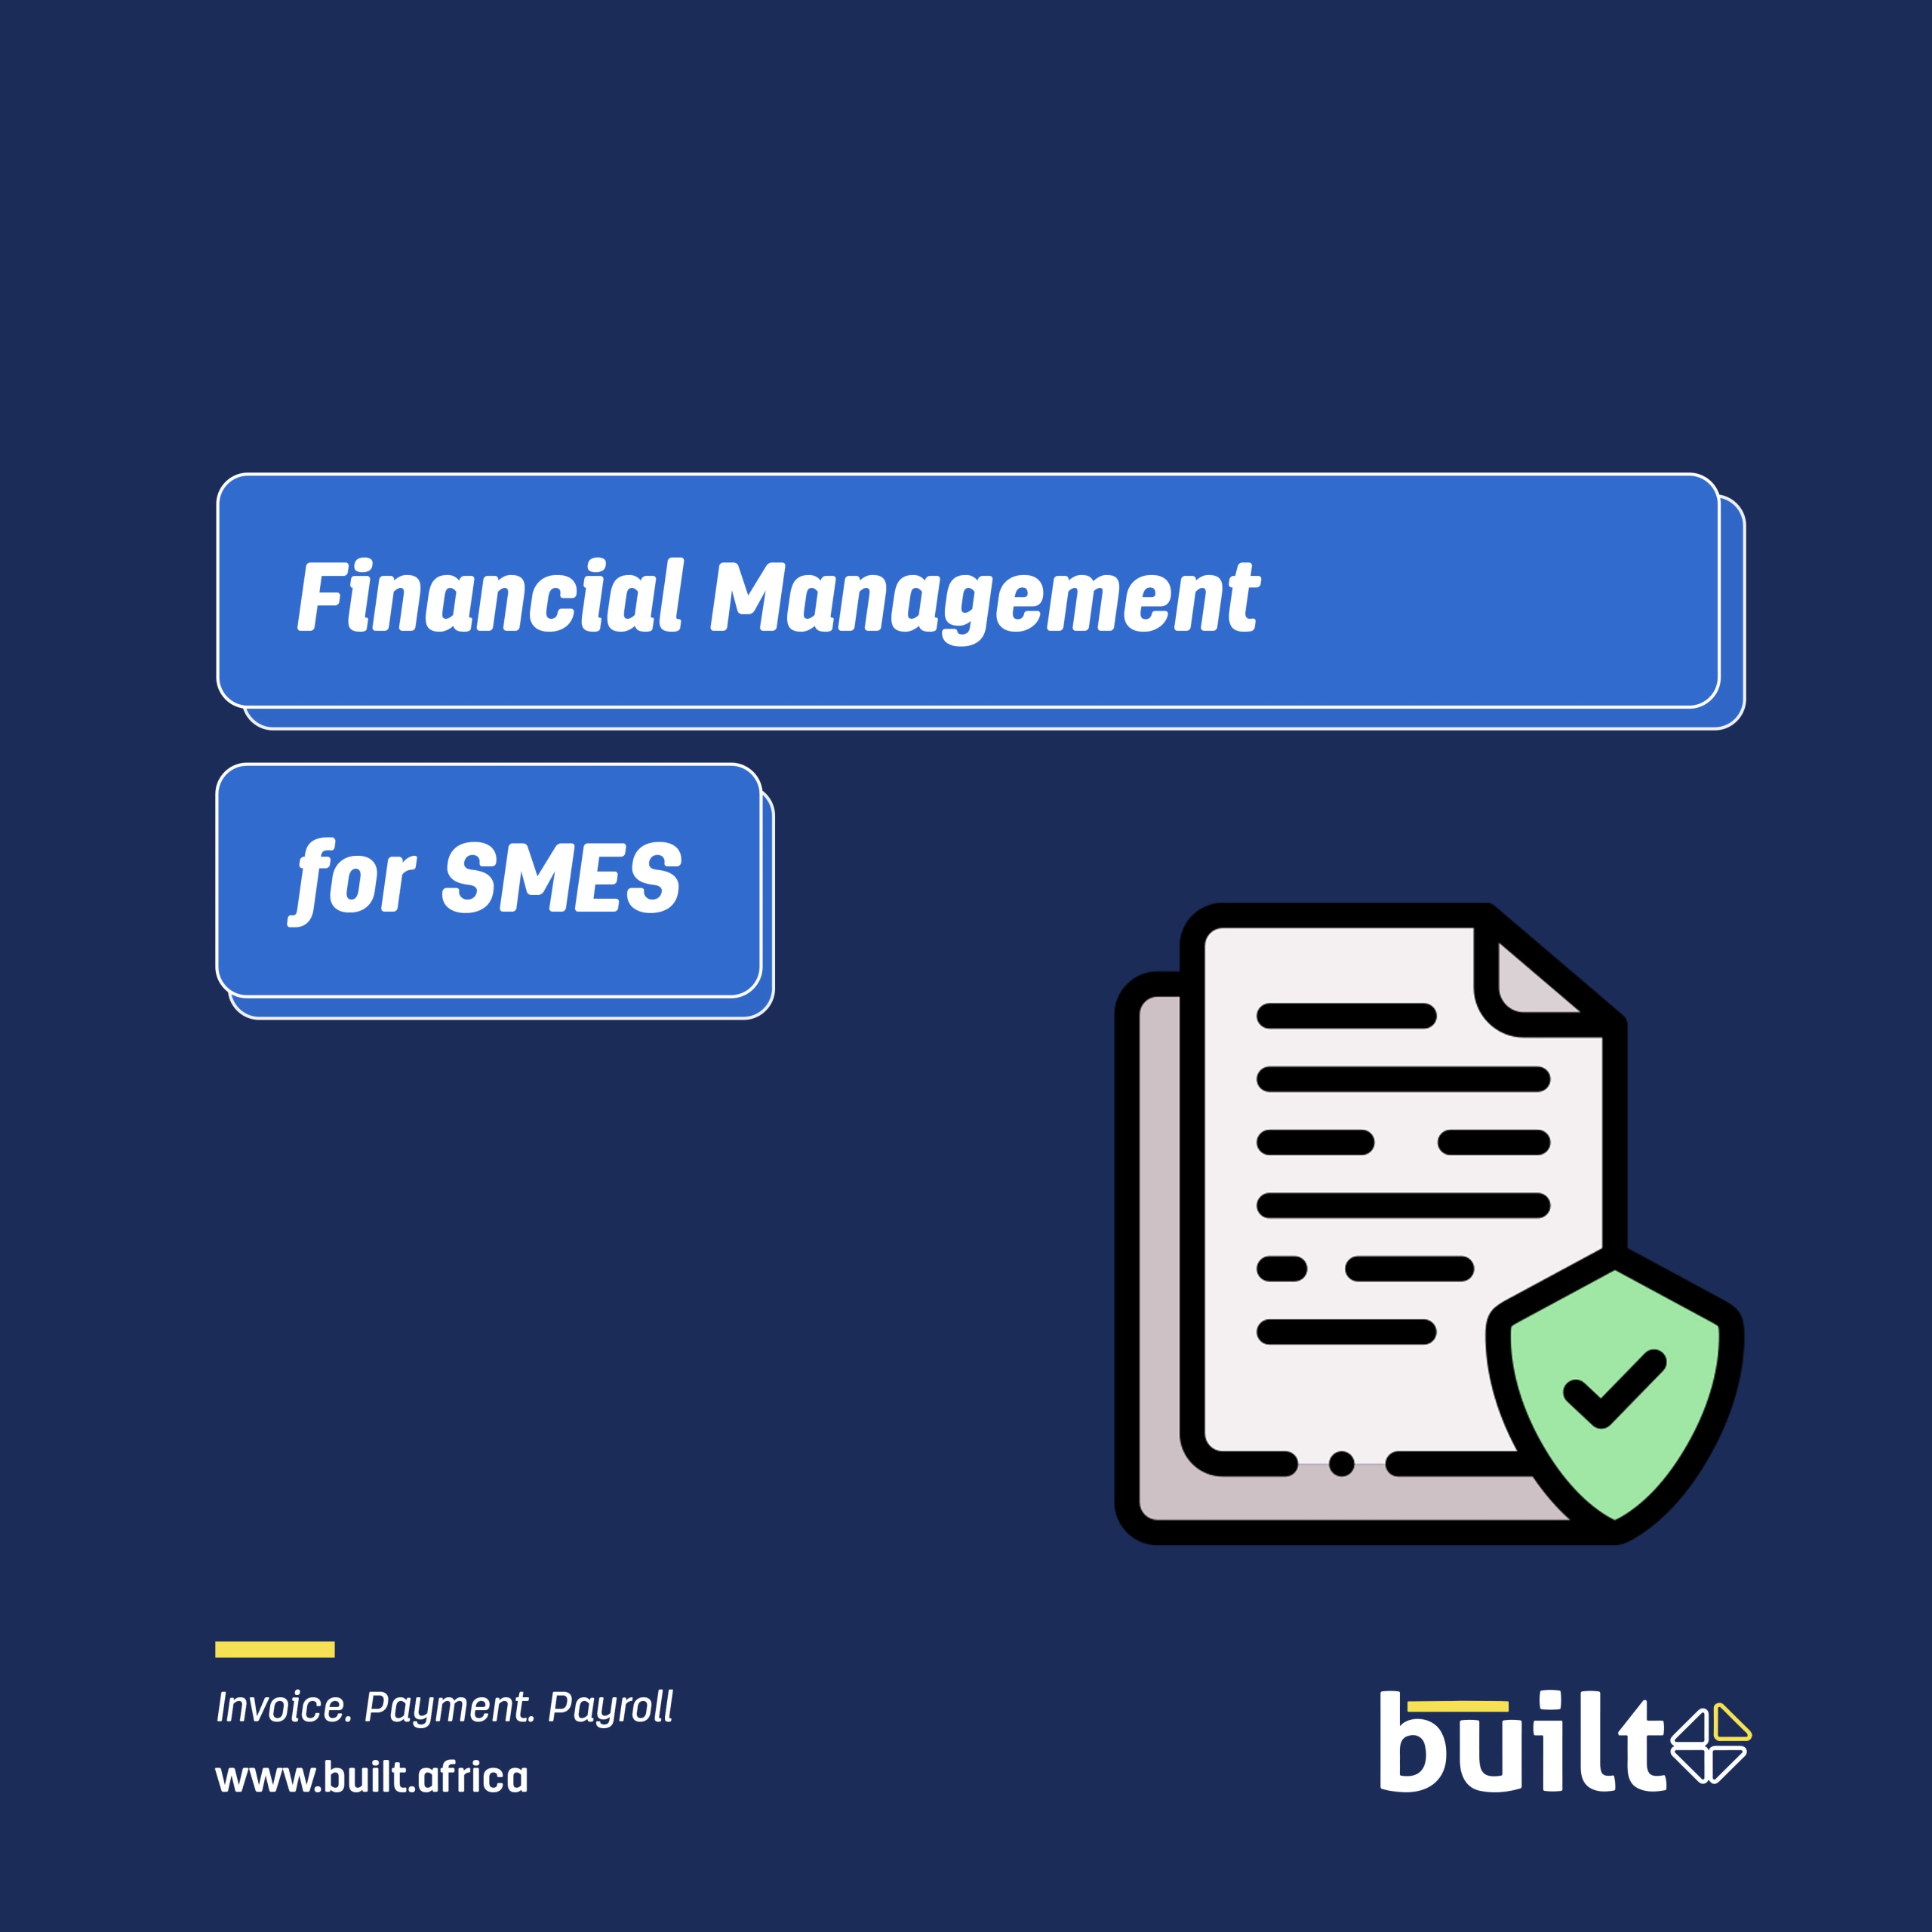 Financial Management for SMEs